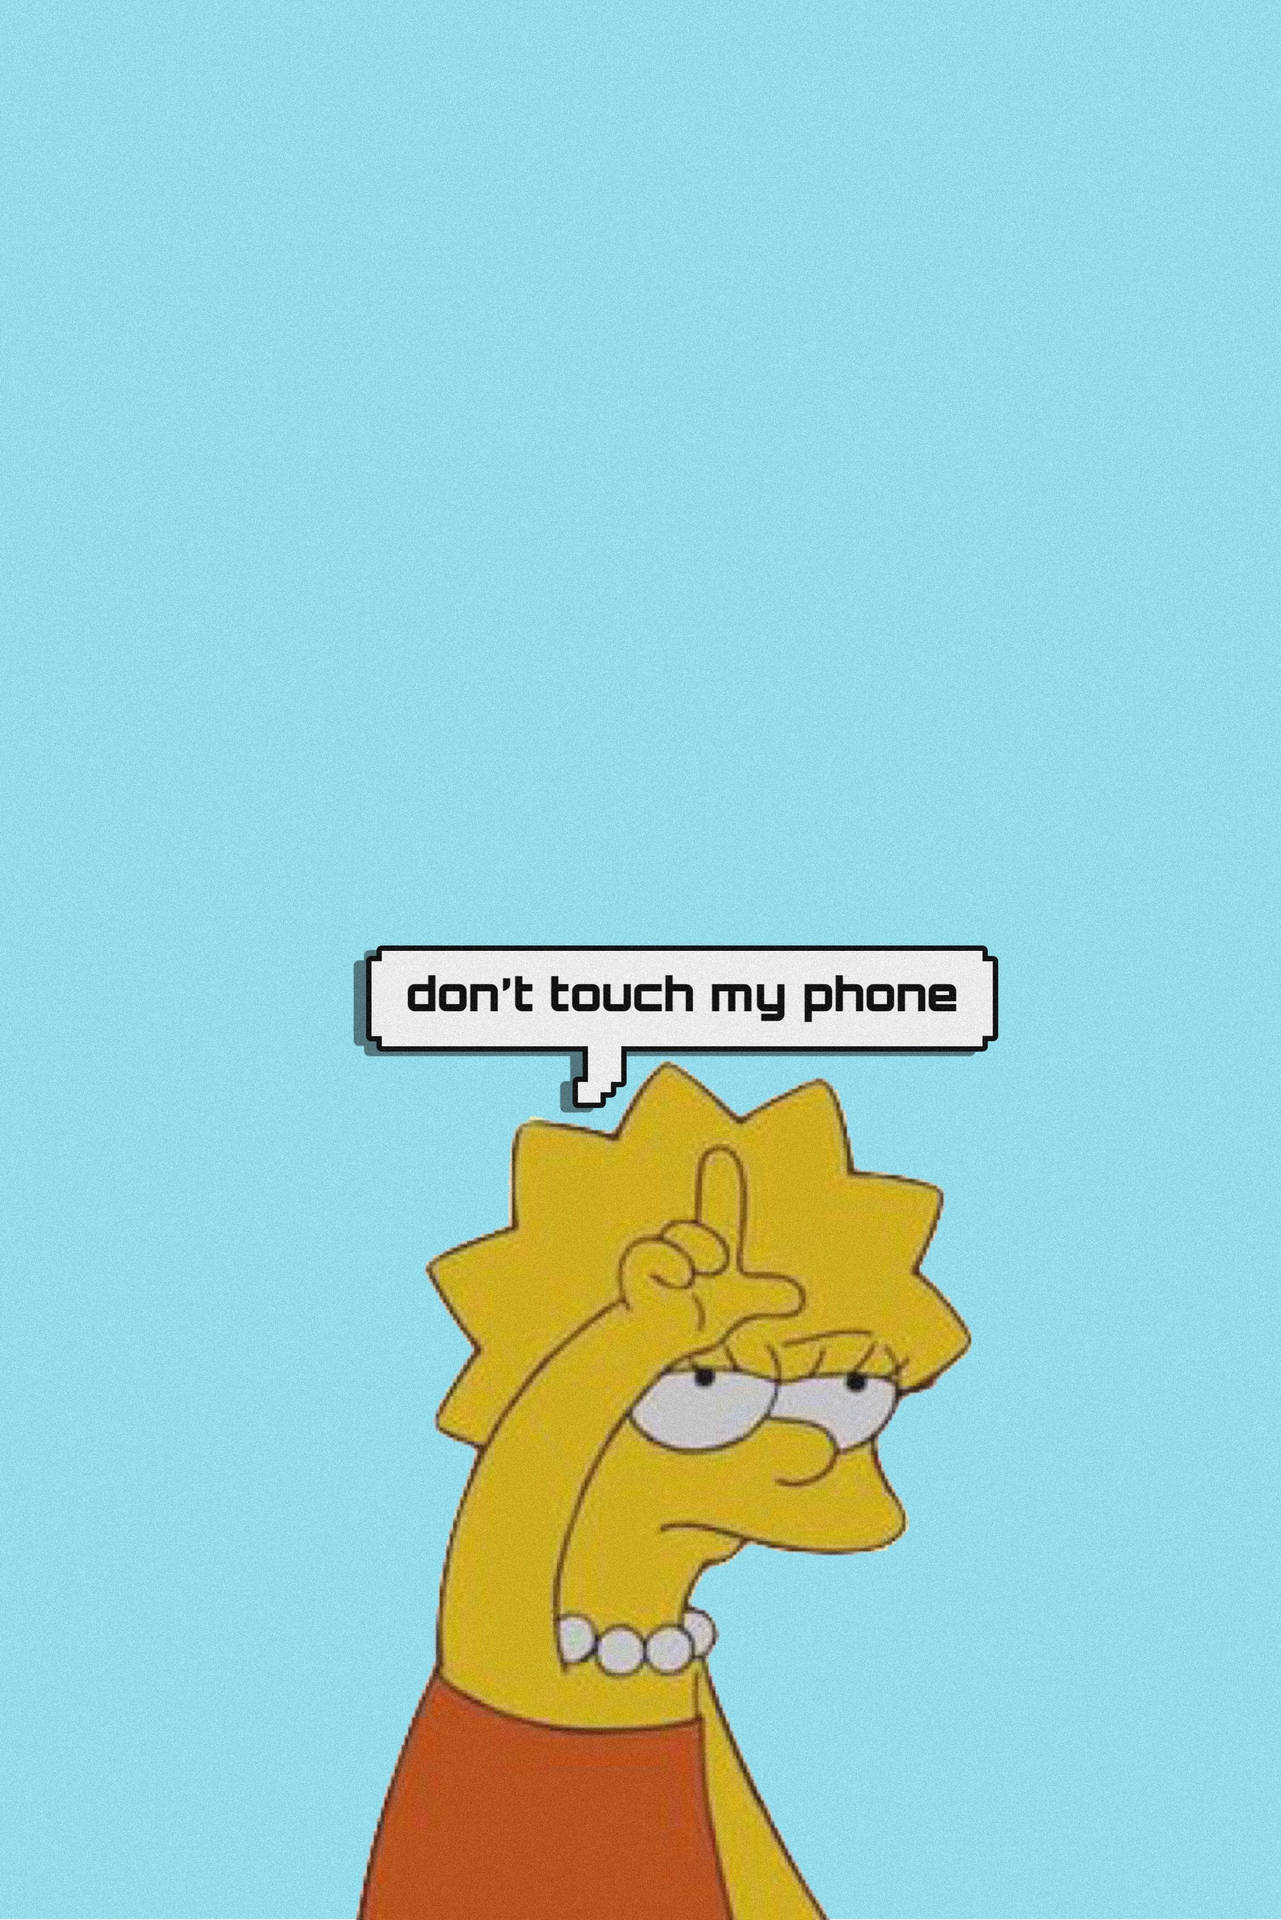 "Assertive Lisa Simpson Warning: 'Don't Touch My Phone'." Wallpaper